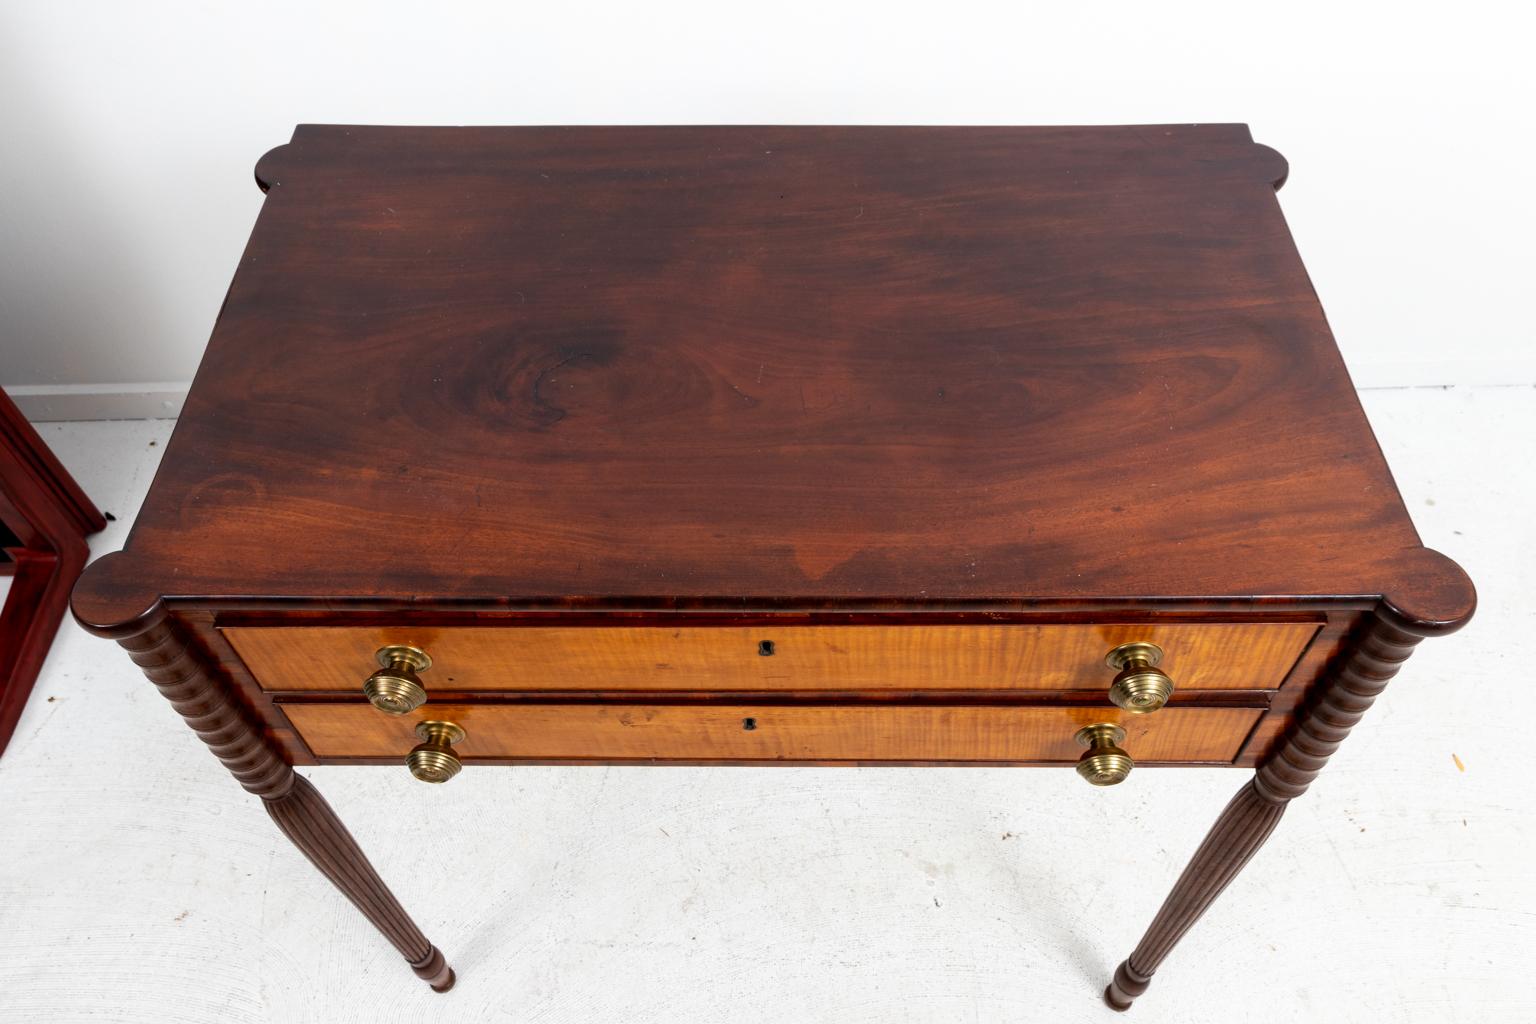 English Federal style inlaid and banded mahogany and satinwood server with two drawers, federal style brass pulls, and turned legs, circa 1920s. The first drawer is fitted for flatware. Made in England. Please note of wear consistent with age along